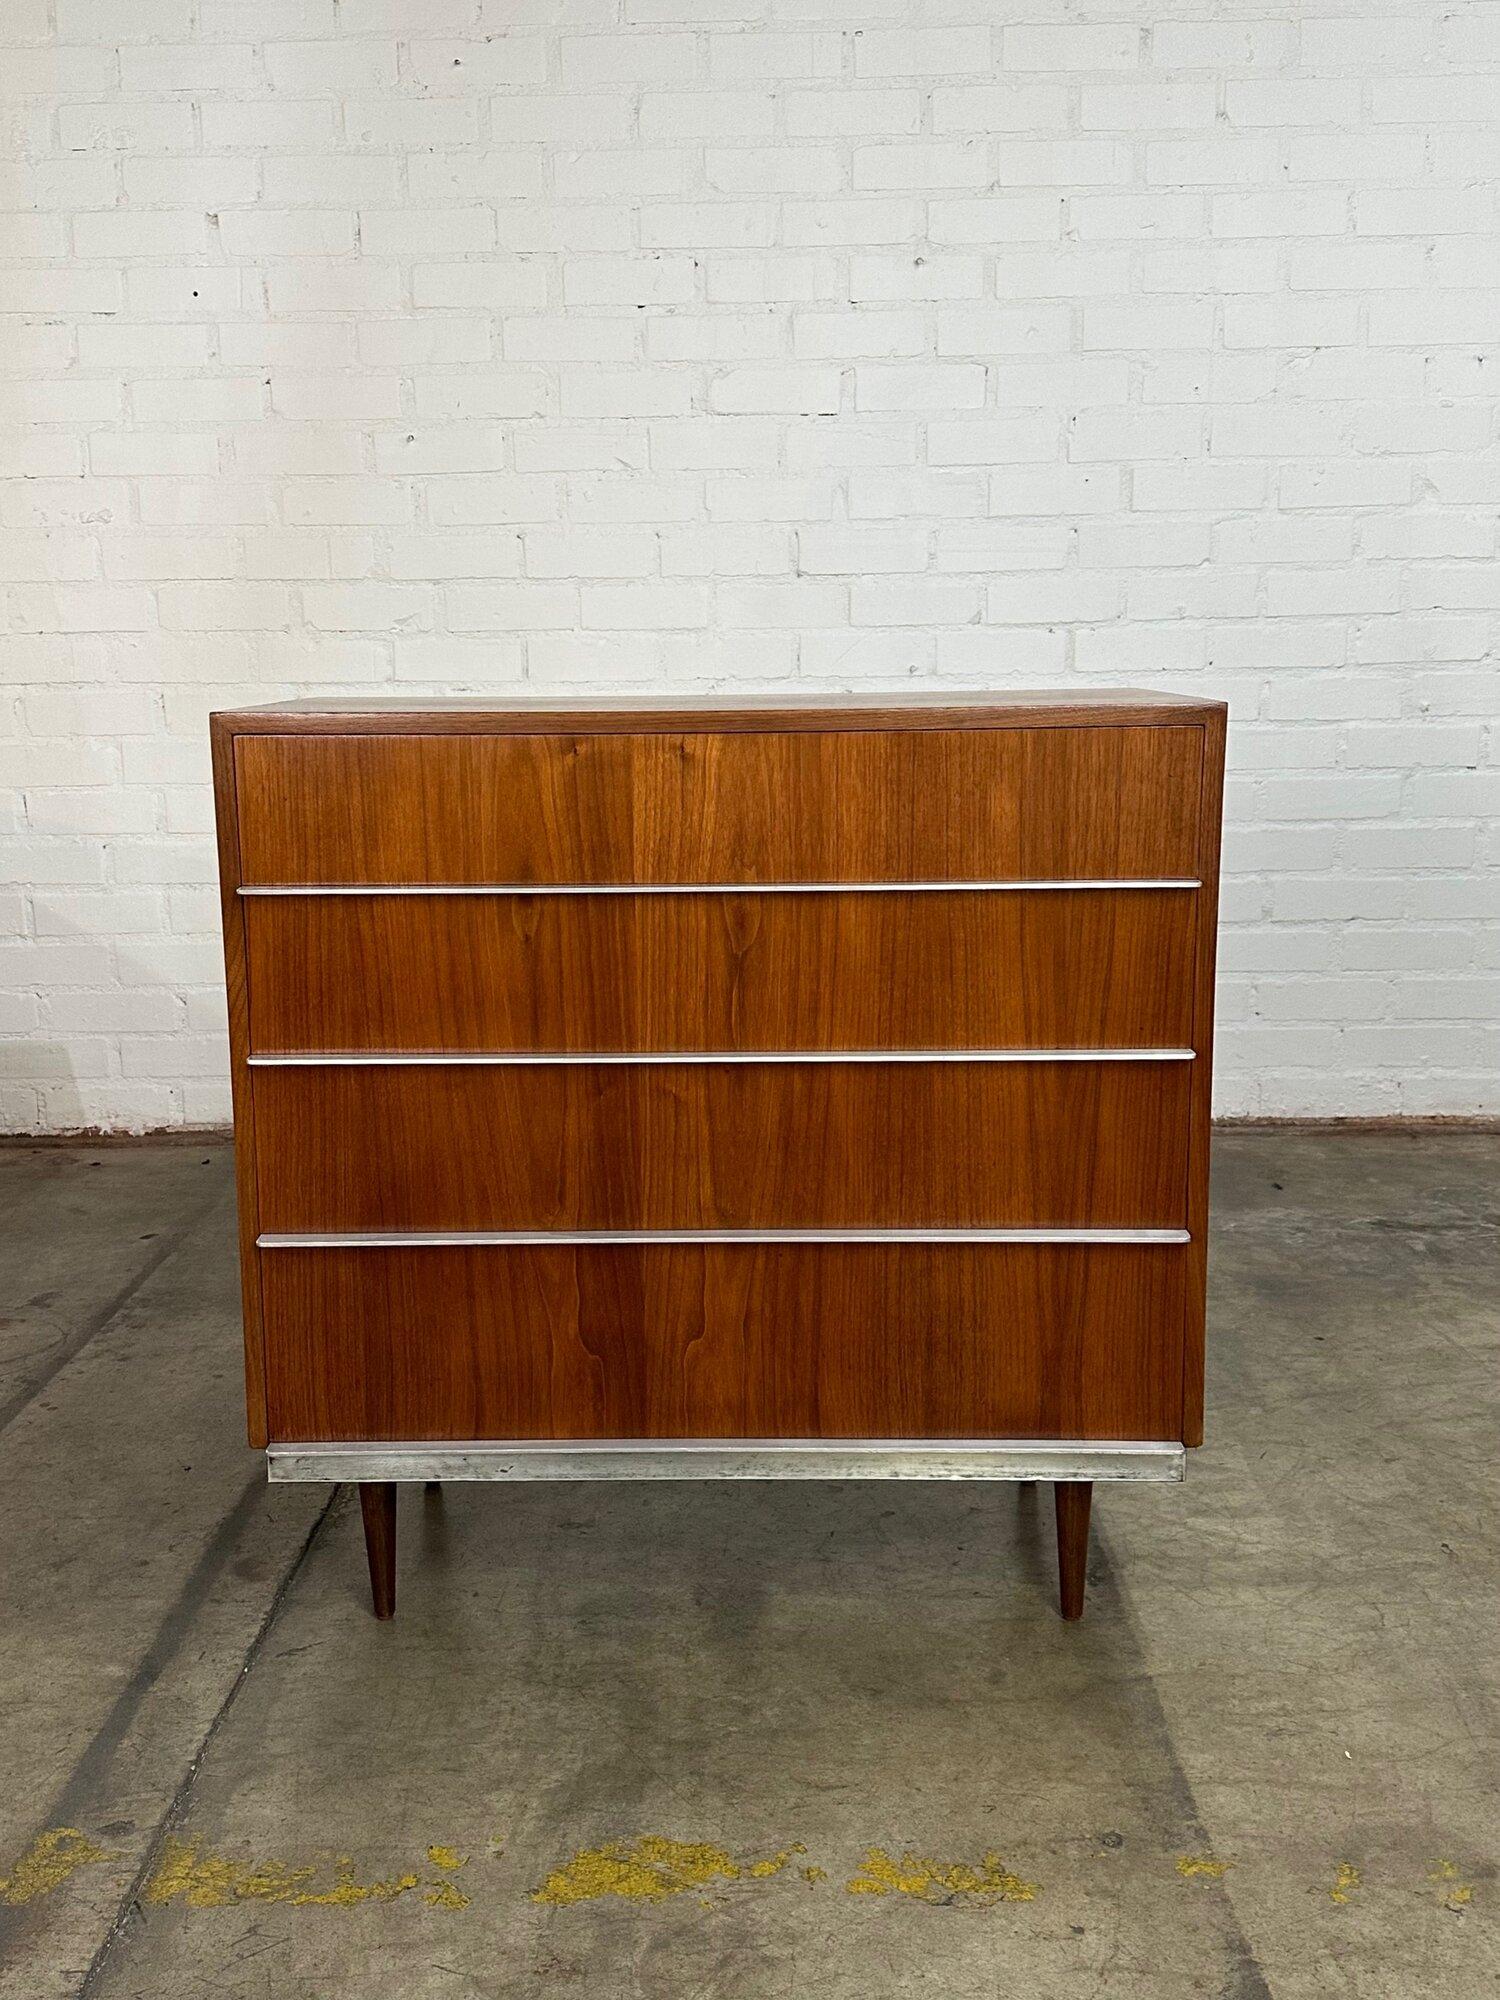 W37.5 D19 H38

Spacious 4 drawer chest made of walnut veneer with beautiful polished metal pulls across the drawer fronts. Each drawer slides smoothly is clean and spacious. The legs are solid walnut. This piece has been fully restored and is in